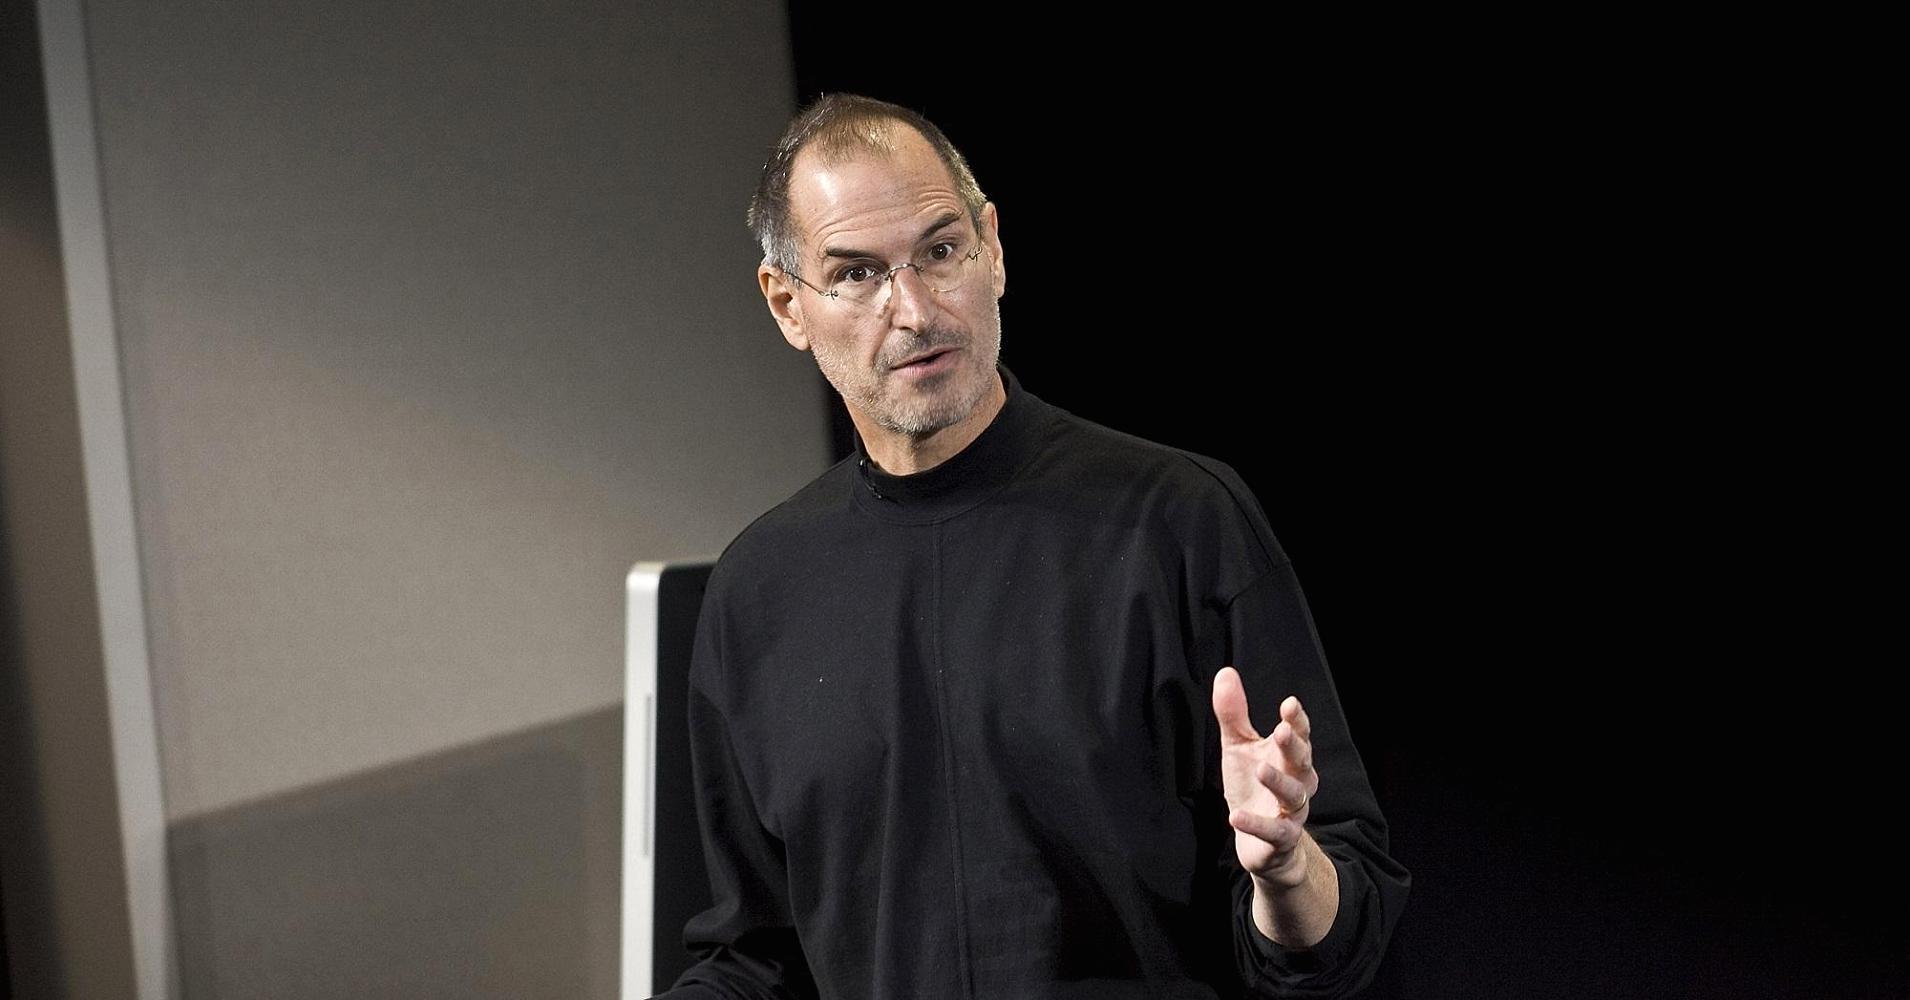 8 Facts That Justify Rumors That Steve Jobs Is Bad